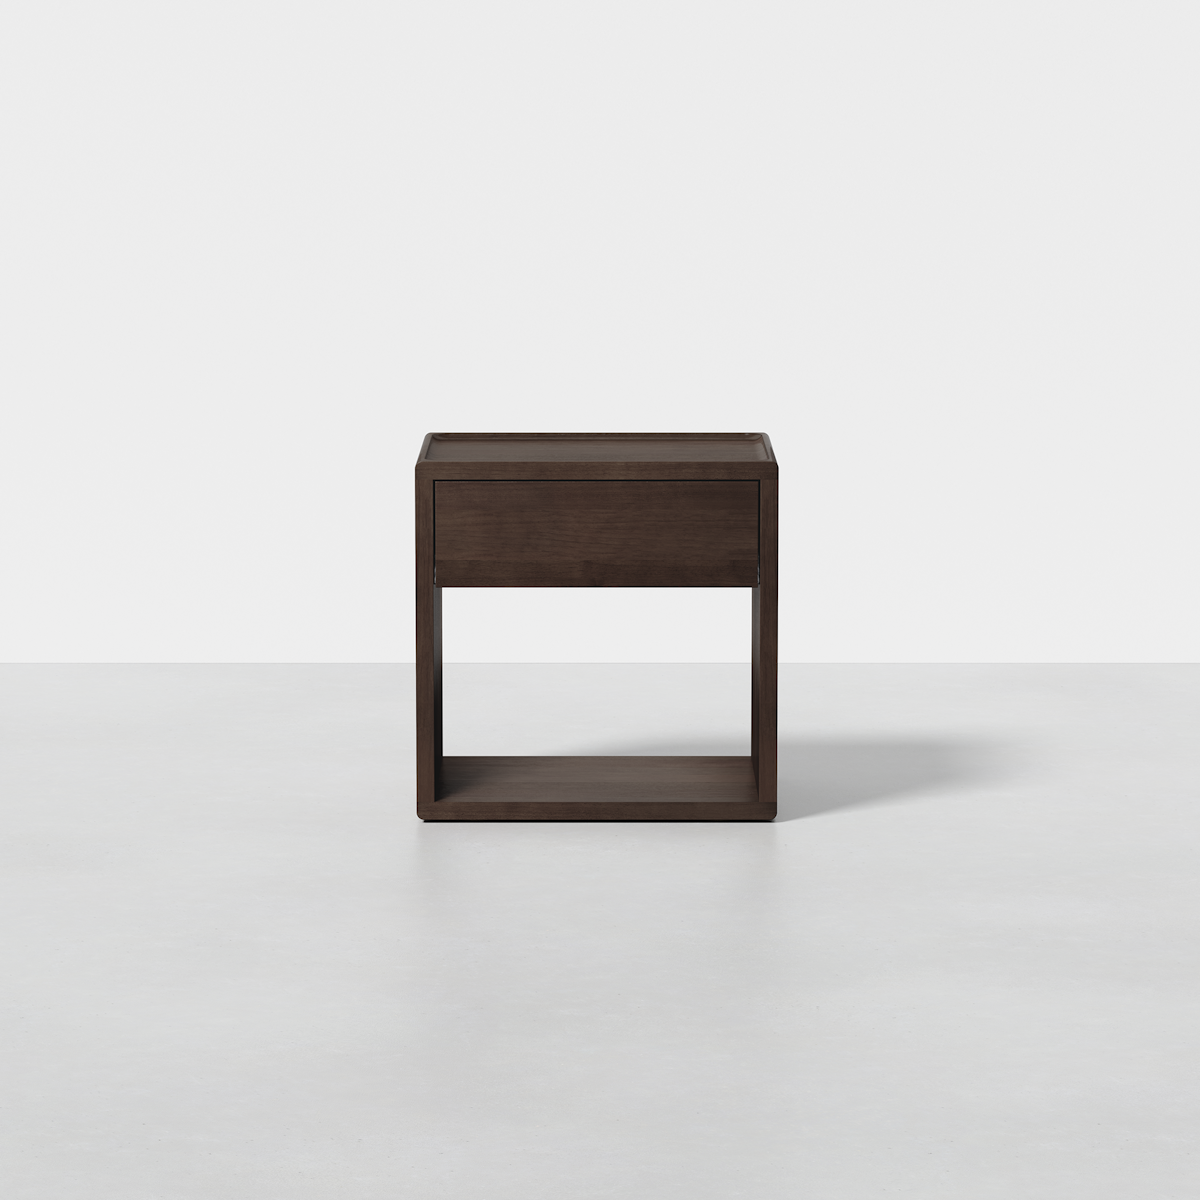 PDP Image: The Nightstand (Espresso) - Render - Front